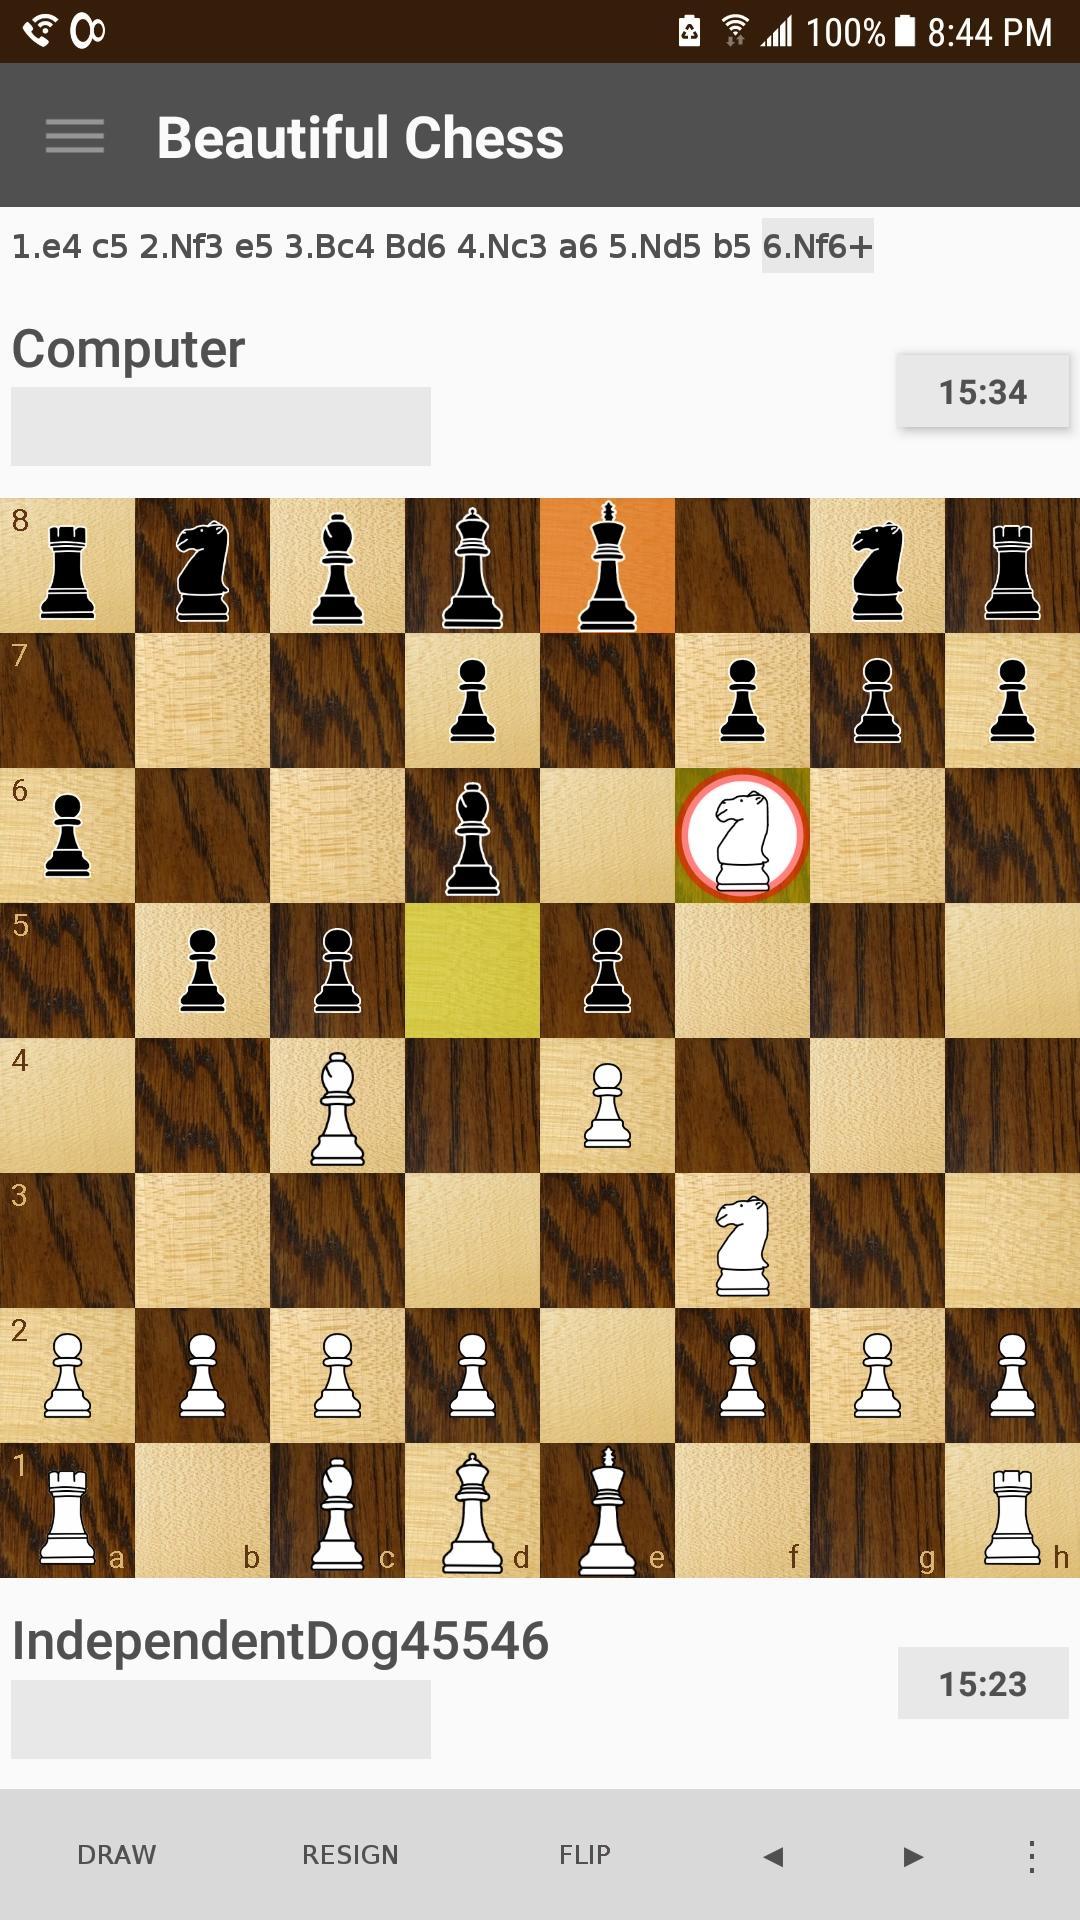 ♛ Beautiful Chess: Play Free Online, OTB, vs CPU for Android - APK Download